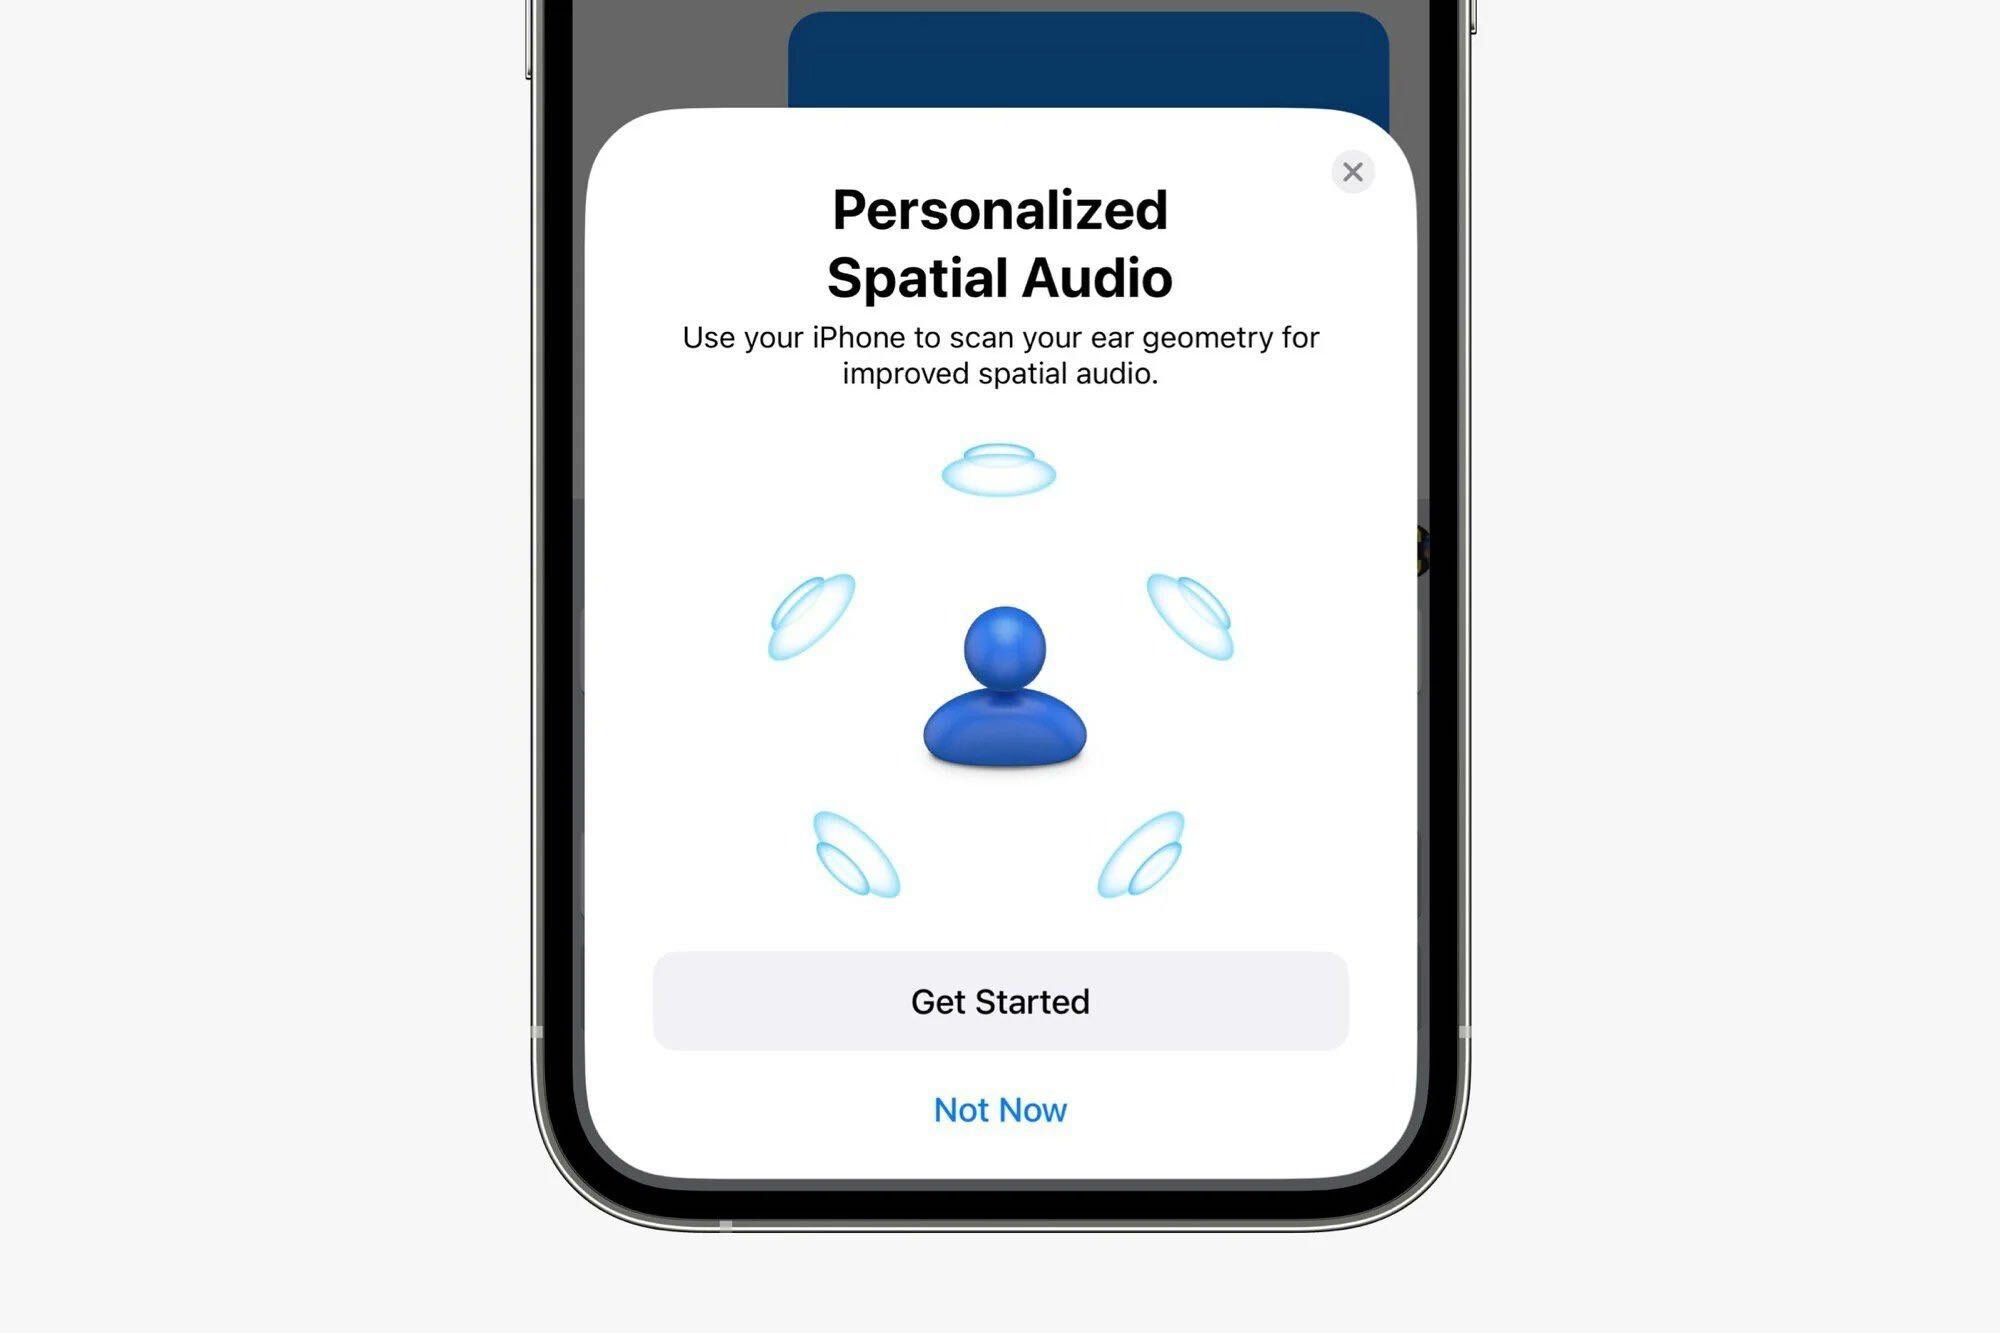 The sheet we're attempting to replicate. A sheet with the title "Personalized Spatial Audio," which has two buttons at the bottom, titled "Get Started" and "Not Now"